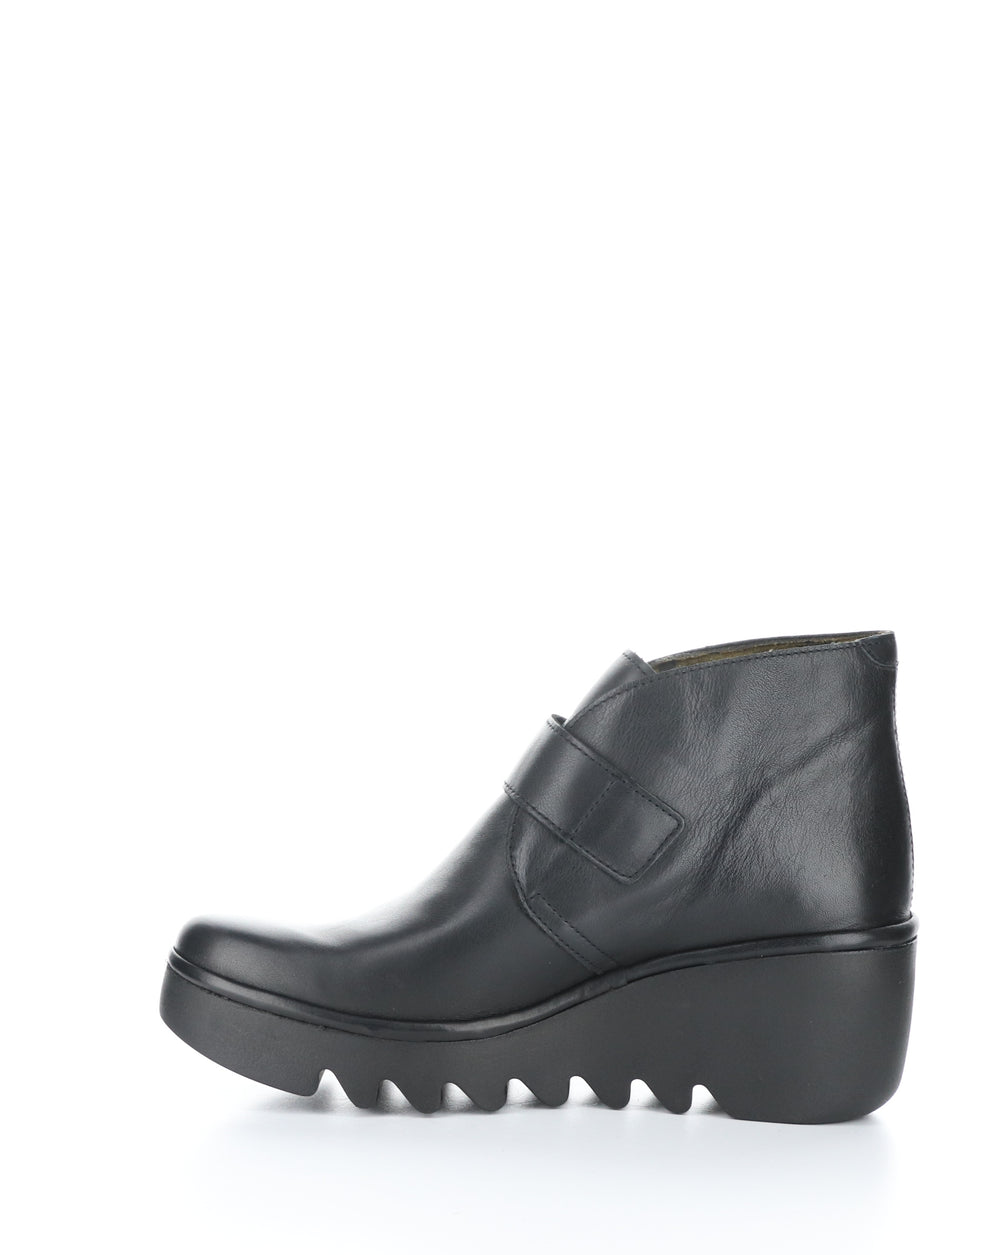 BIRT397FLY 004 BLACK Round Toe Boots